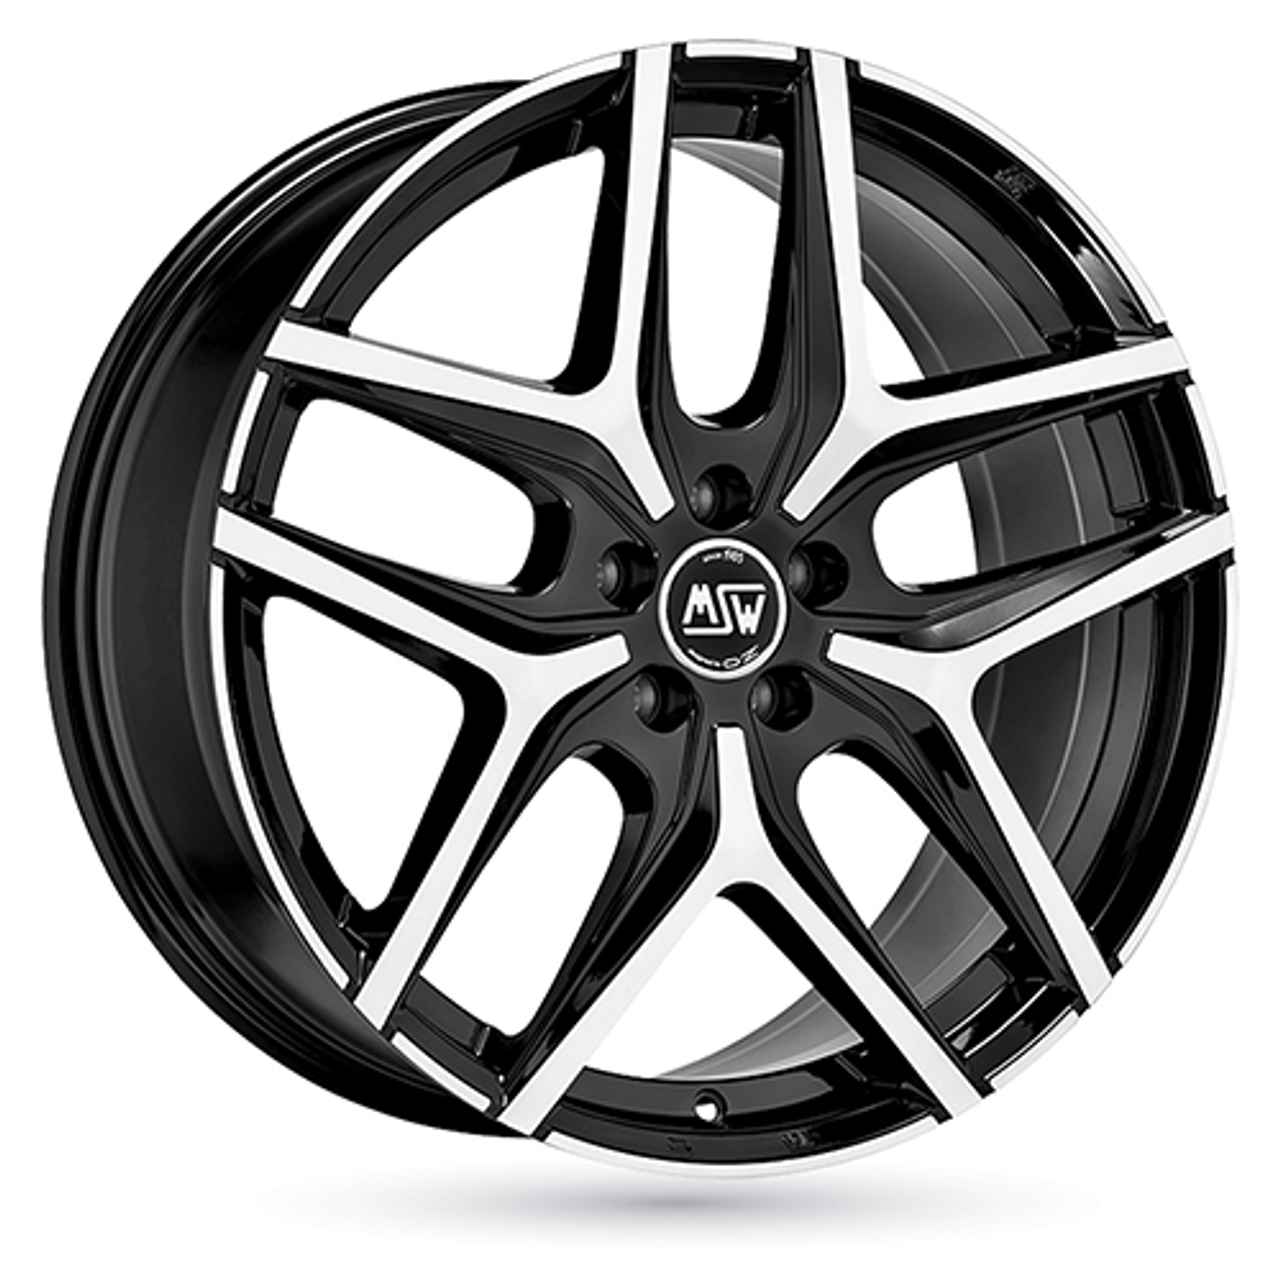 MSW (OZ) MSW 40 gloss black full polished 8.0Jx19 5x114.3 ET50